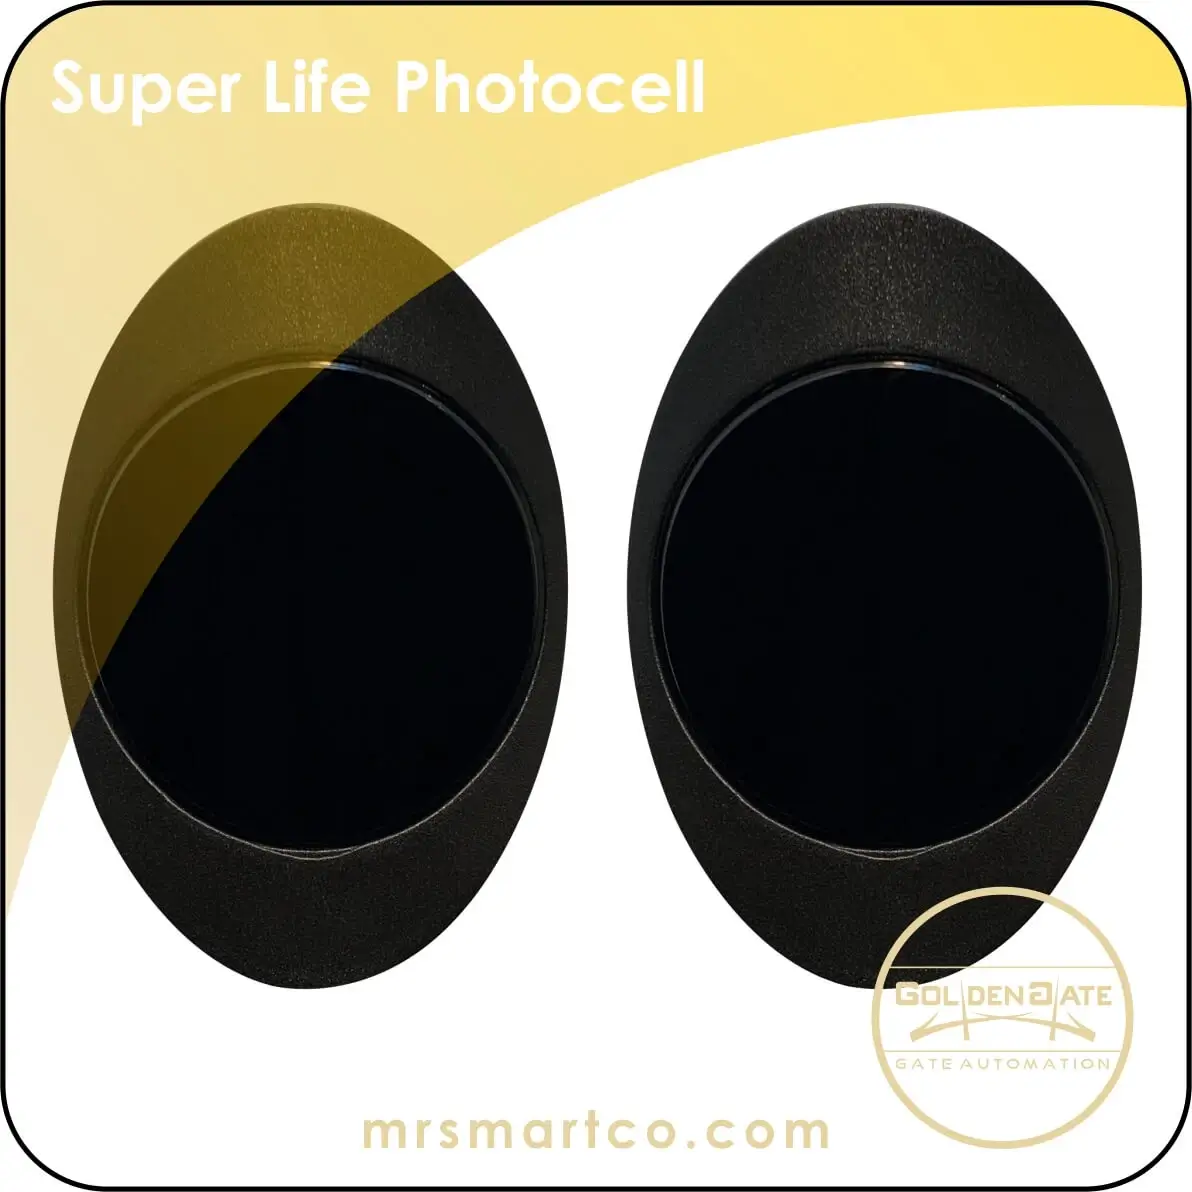 Super Life Photocell